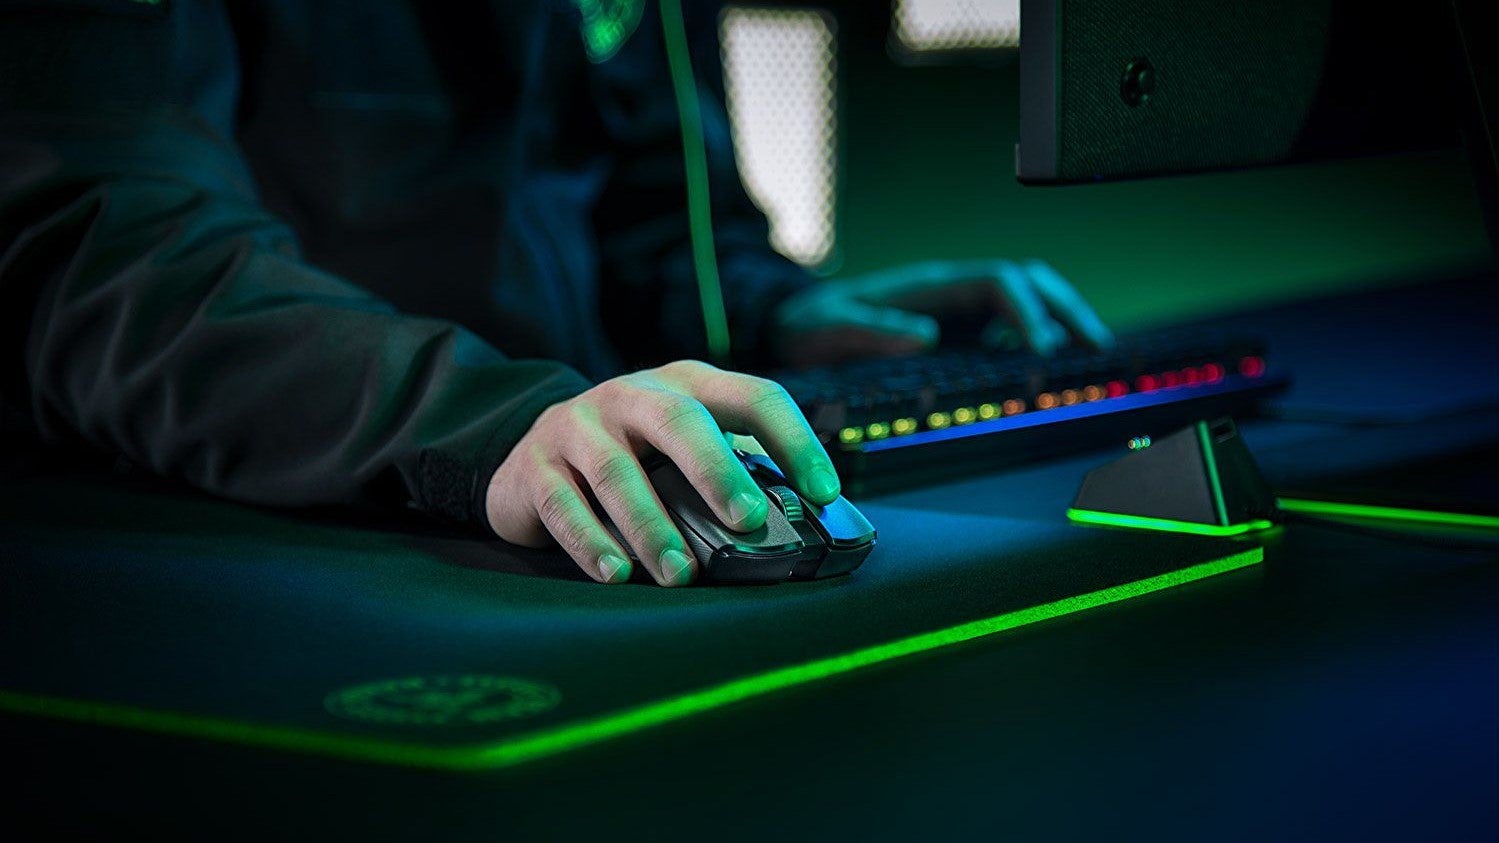 A man uses a gaming mouse on an RGB-lit mousemat.